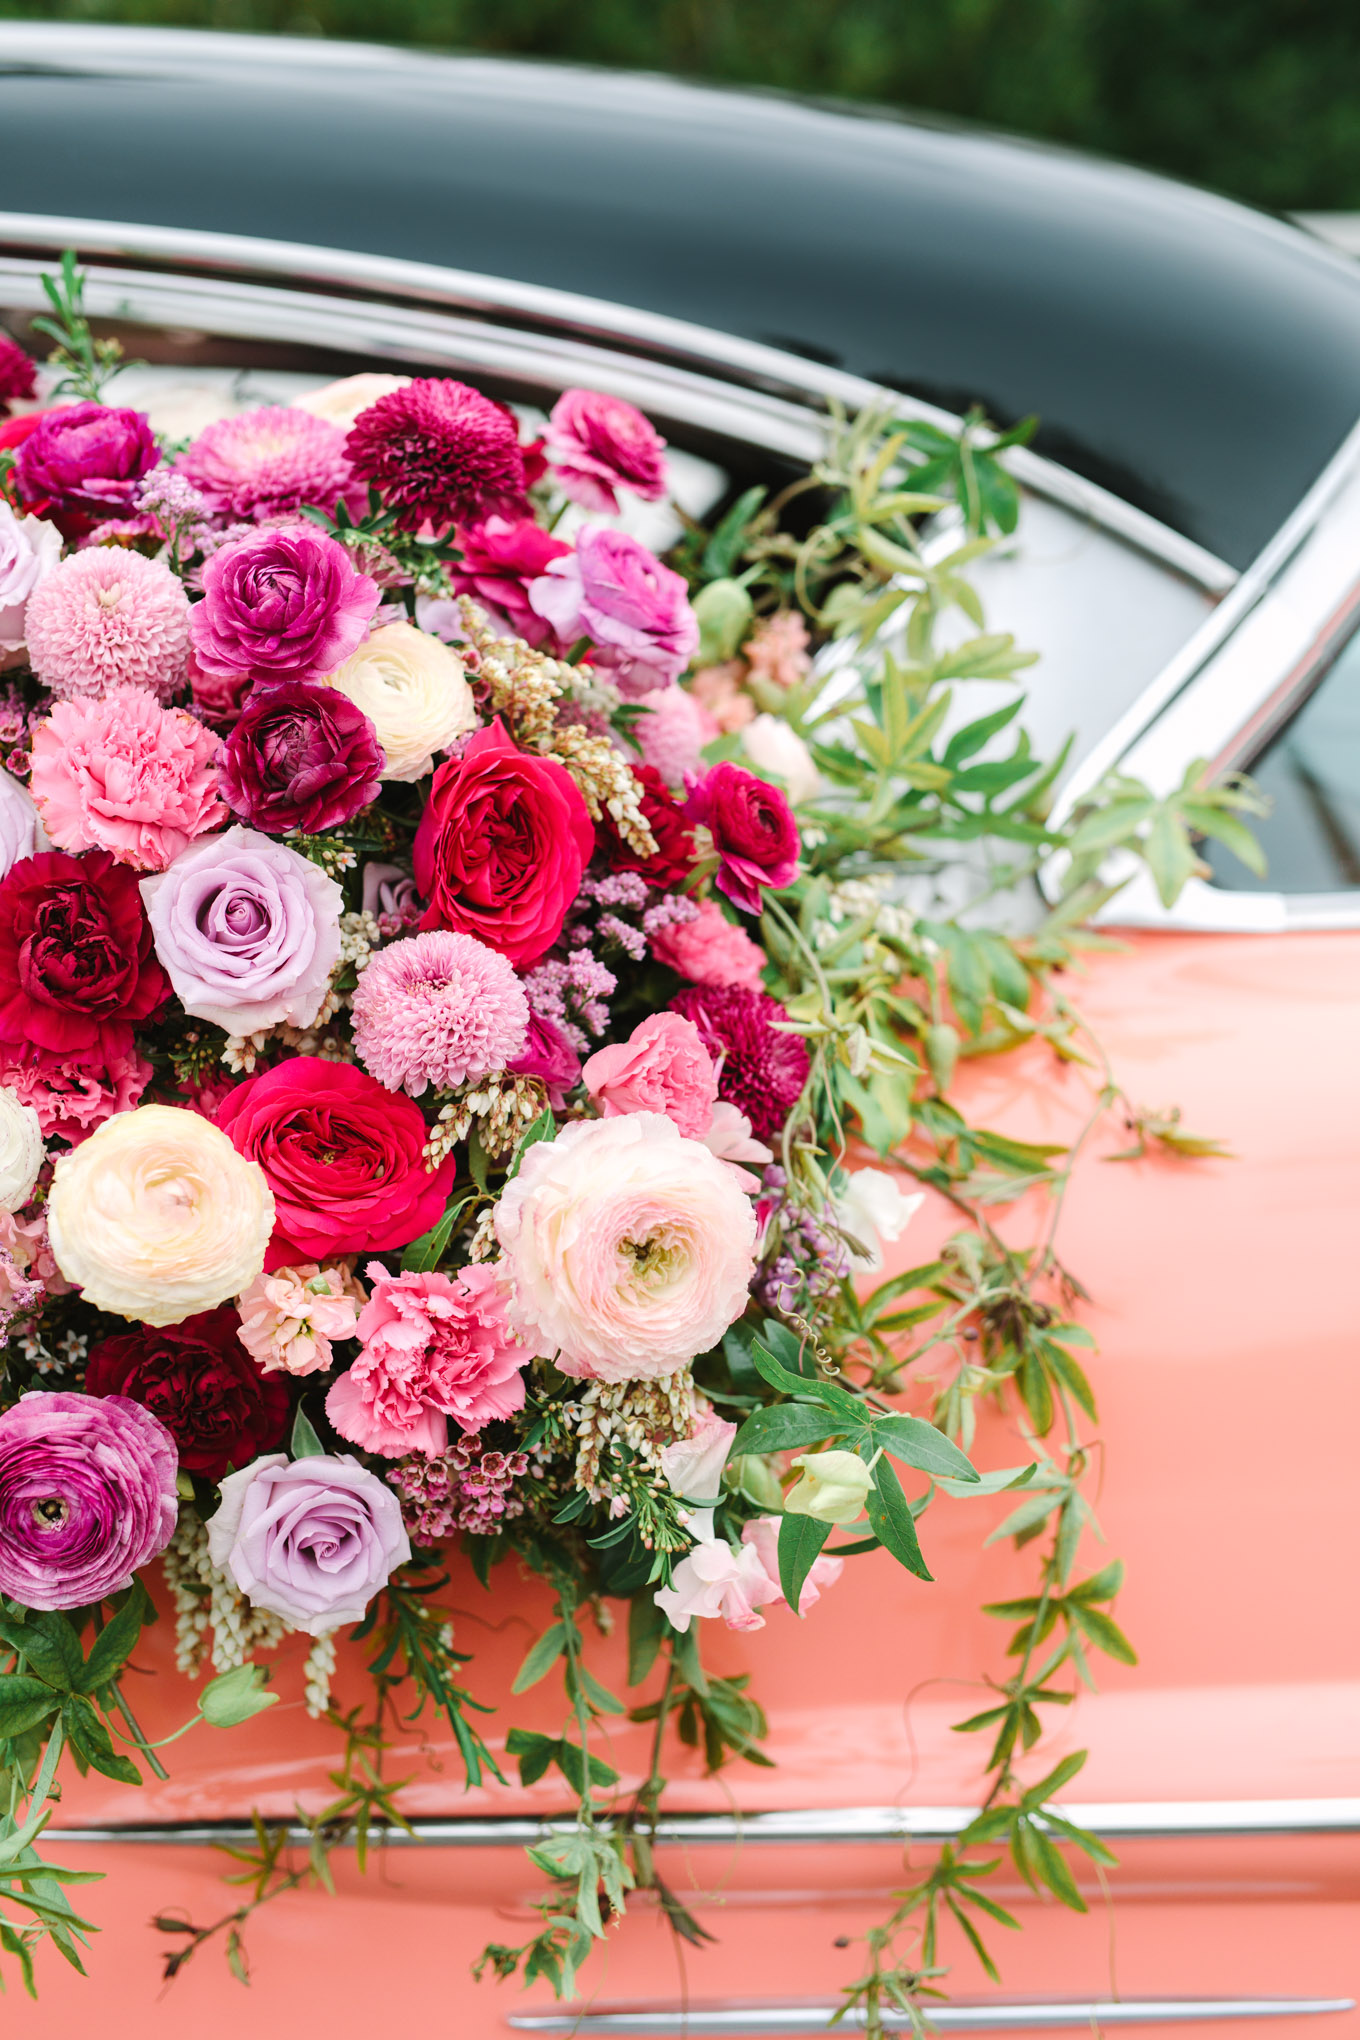 Close up of flower car detail. Modern vintage-inspired Palm Springs engagement session with a 1960s pink Cadillac, retro clothing, and flowers by Shindig Chic. | Colorful and elevated wedding inspiration for fun-loving couples in Southern California | #engagementsession #PalmSpringsengagement #vintageweddingdress #floralcar #pinkcar   Source: Mary Costa Photography | Los Angeles